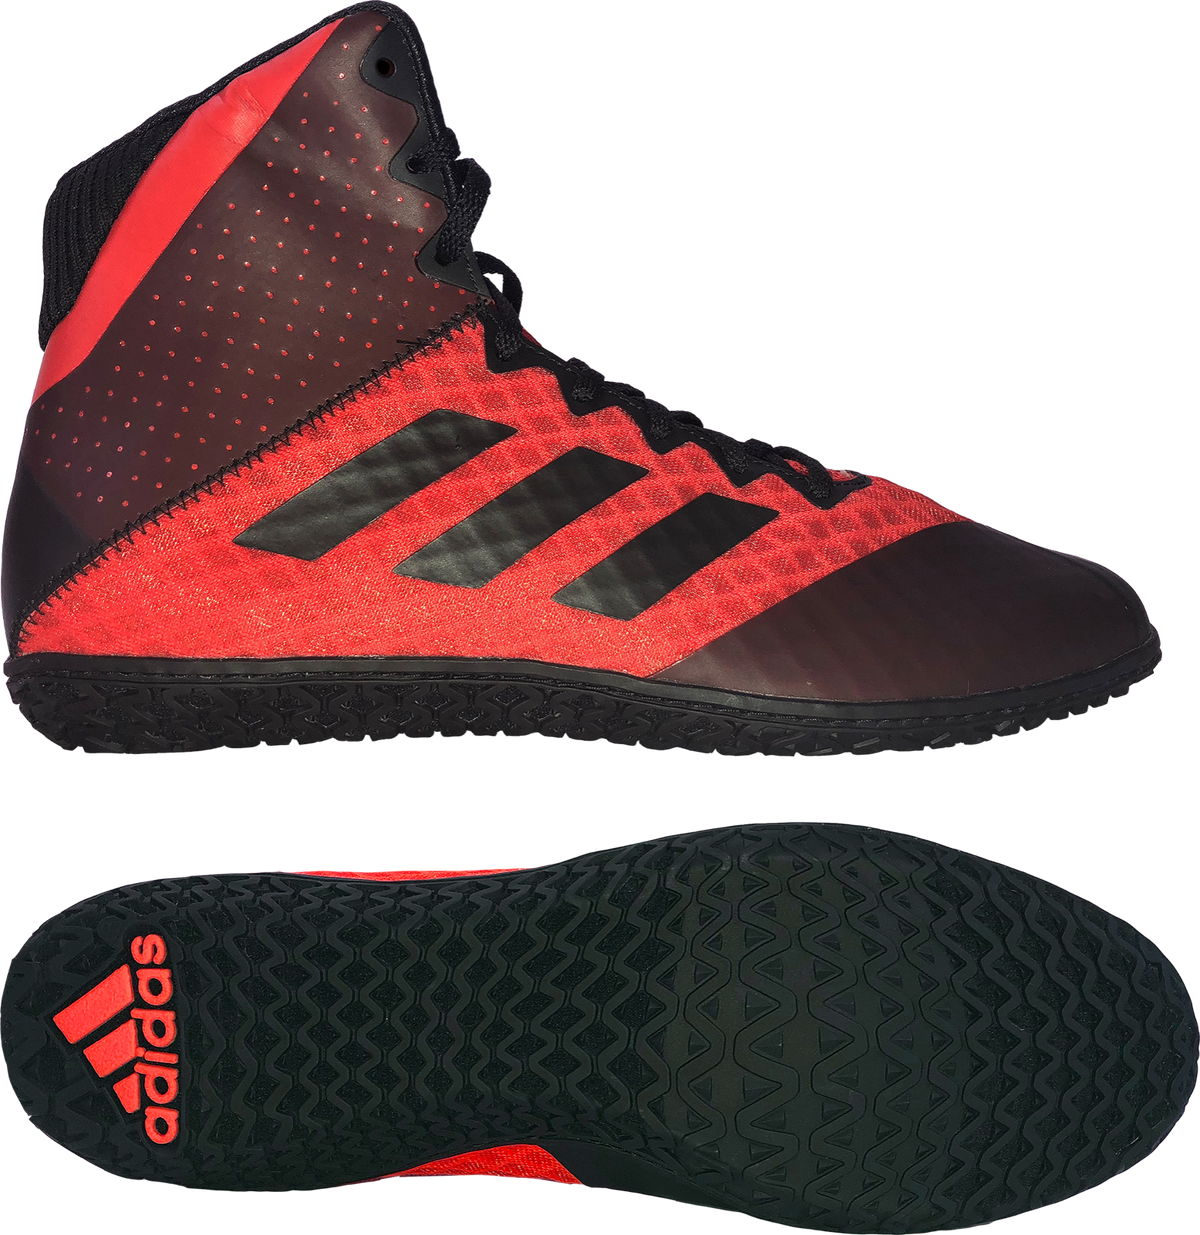 adidas Mat Wizard 4 Men's Wrestling Shoes, Red/White, Size 7